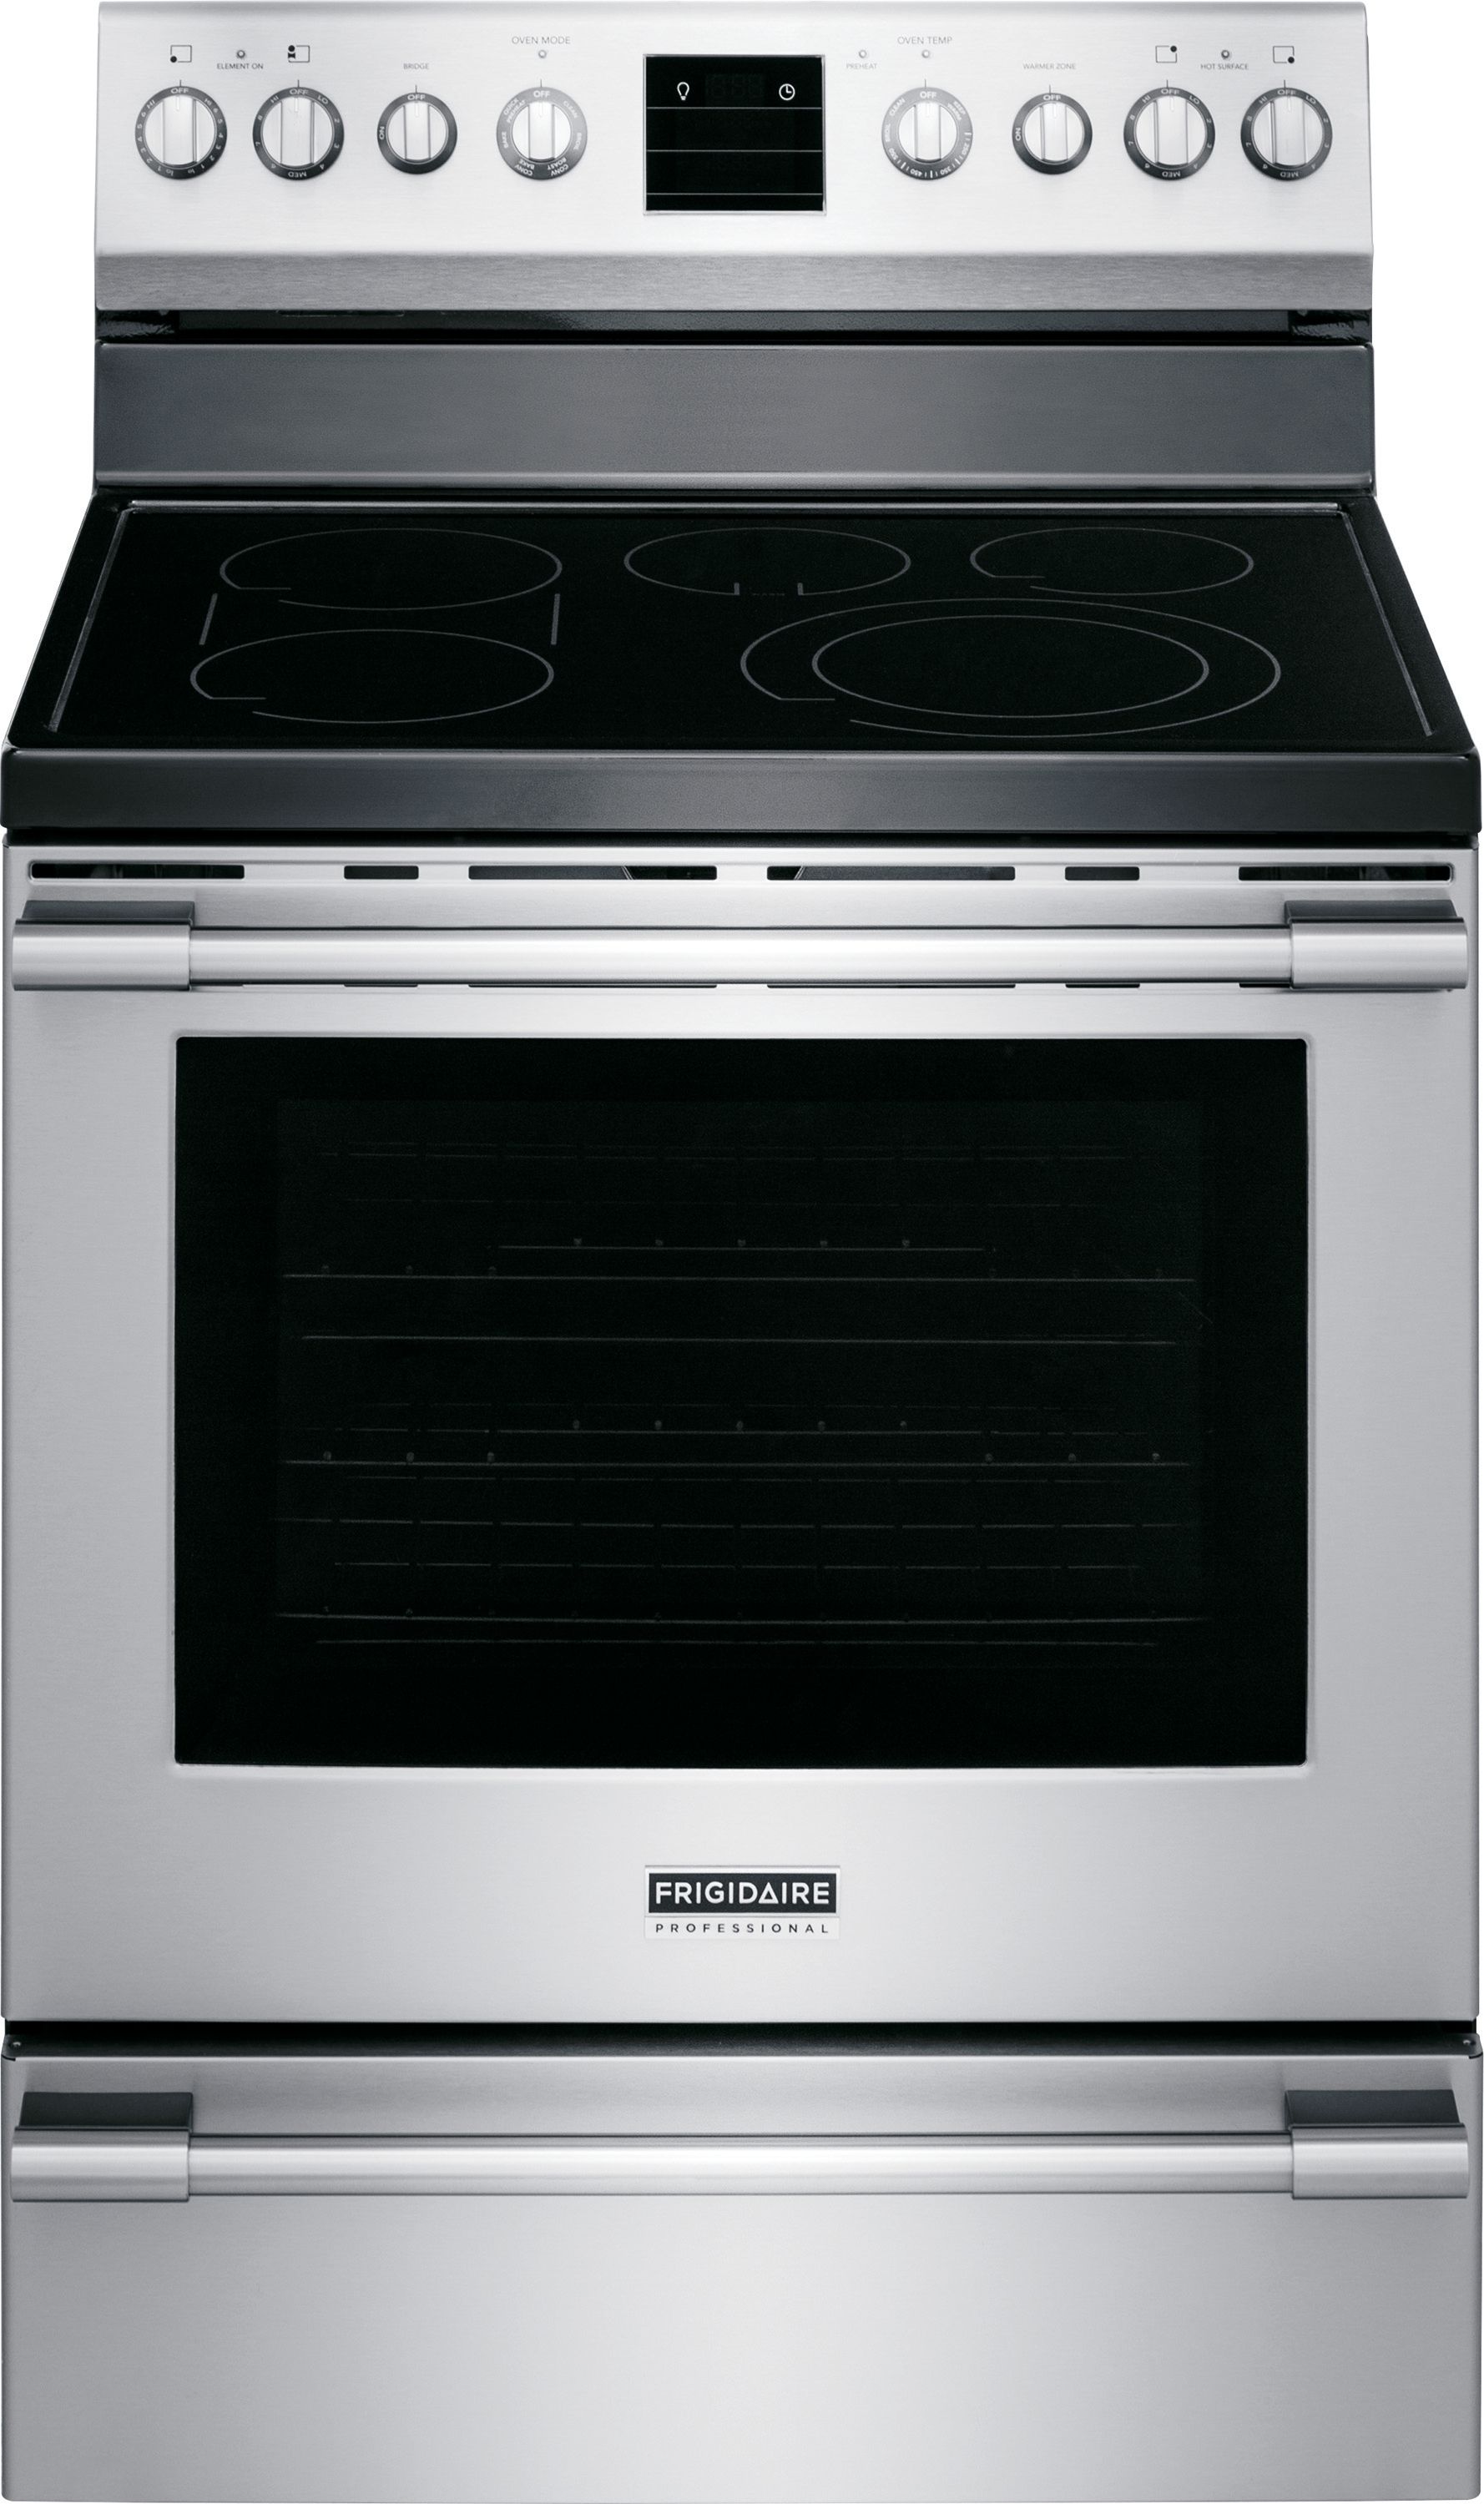 Frigidaire Professional® 30" Stainless Steel Freestanding Electric Range